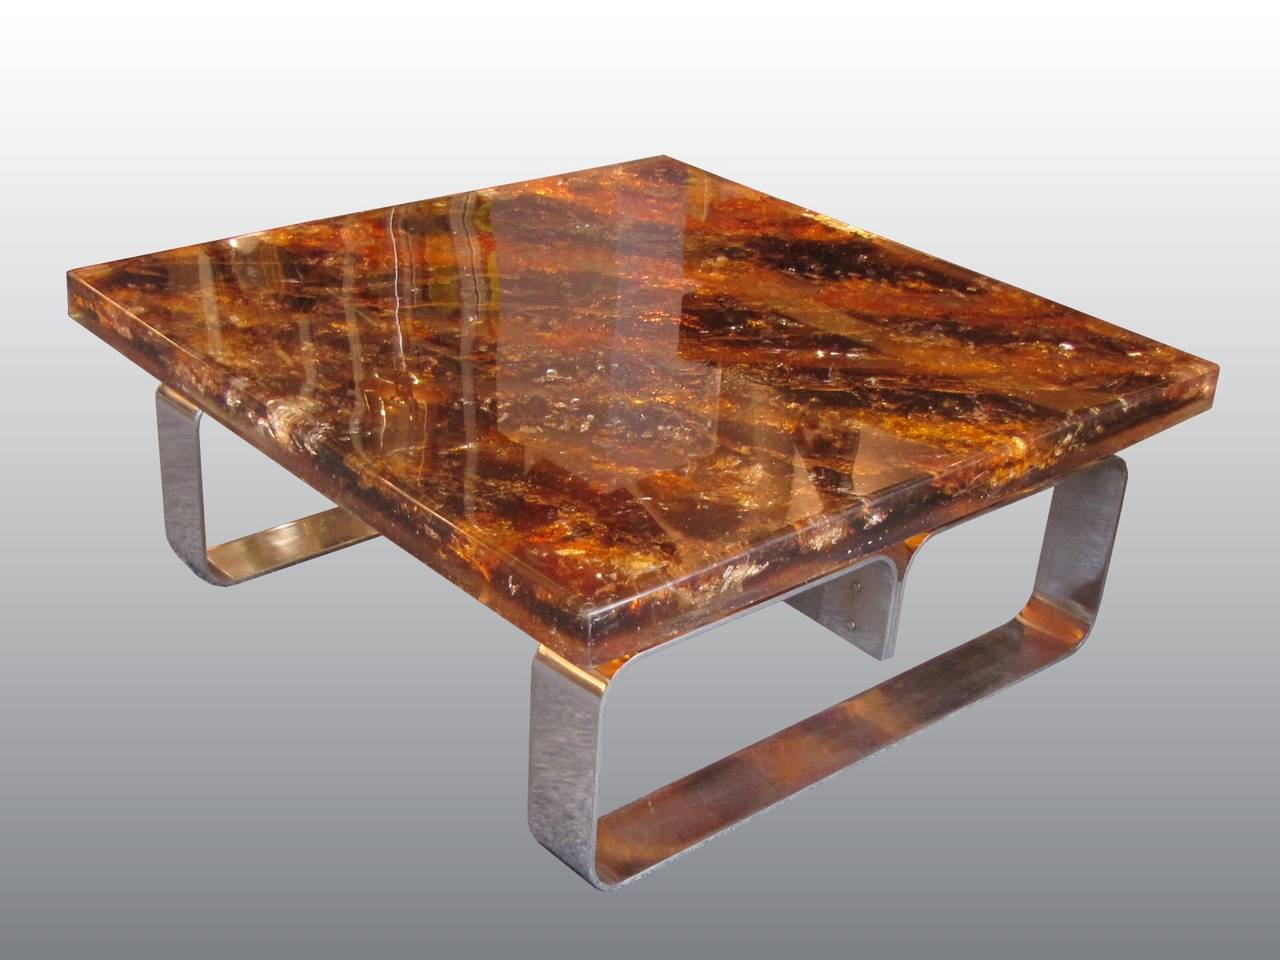 Beautiful coffee table by Gilles Charbin, tray in resin with inclusions, base in polished steel. Unique piece.